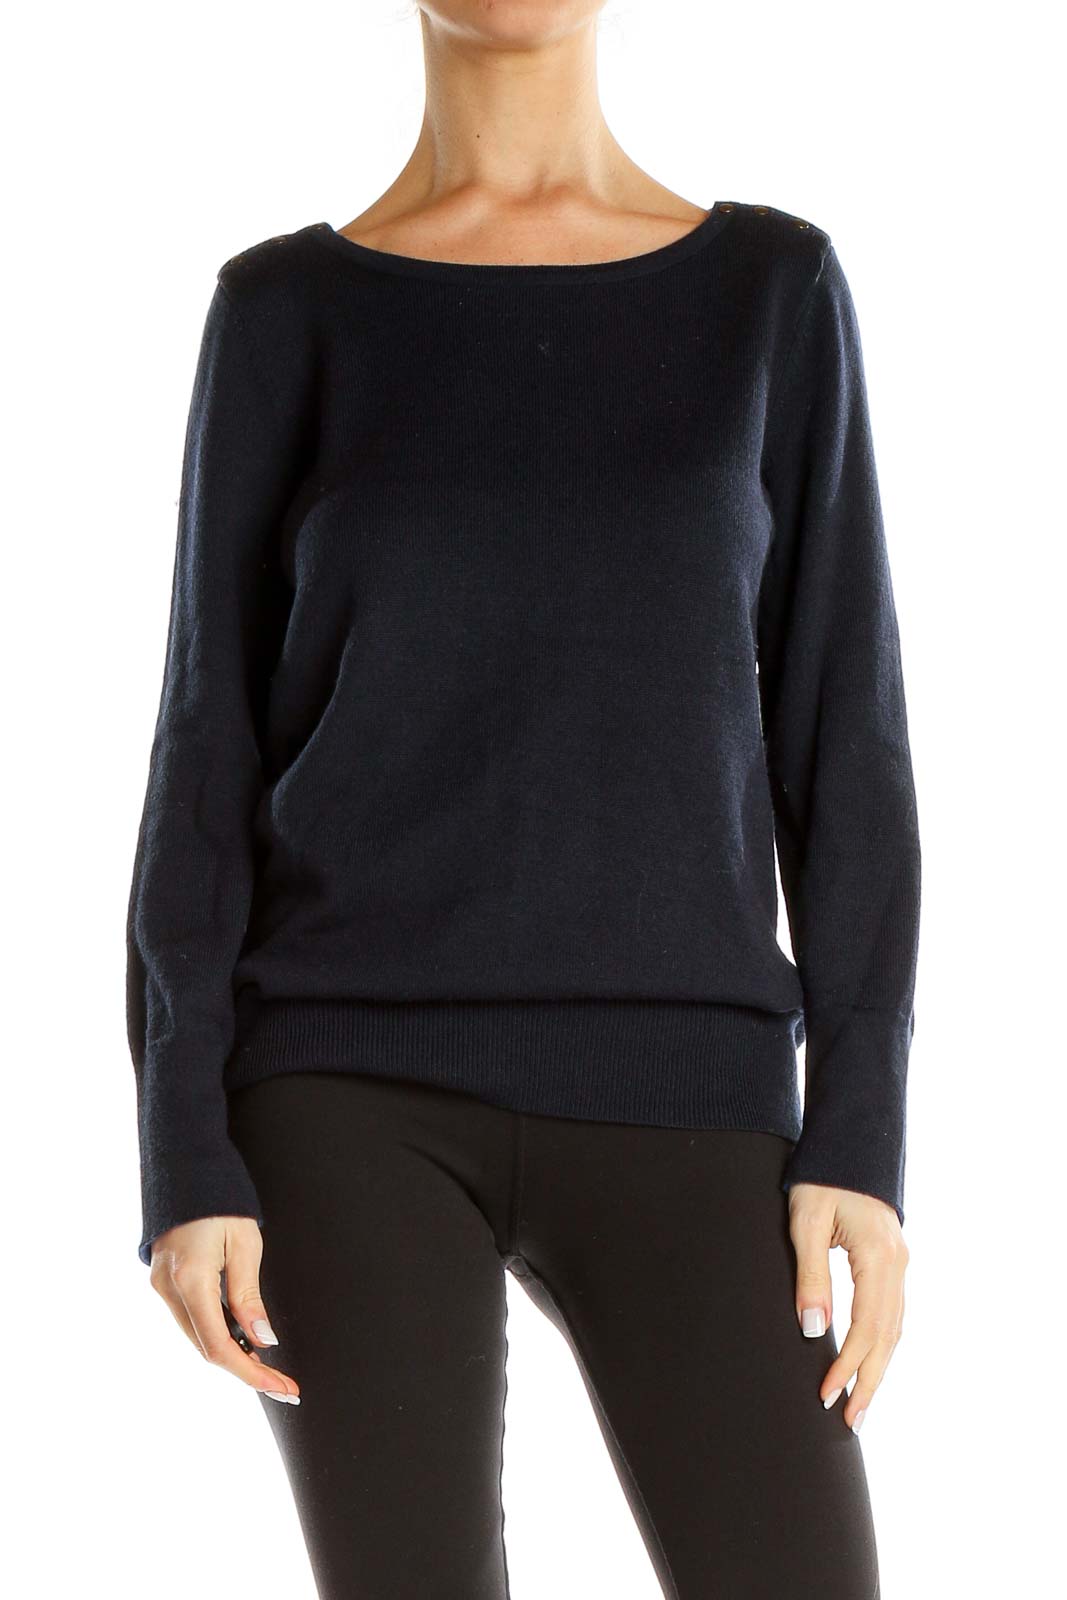 Blue Classic Sweater Front